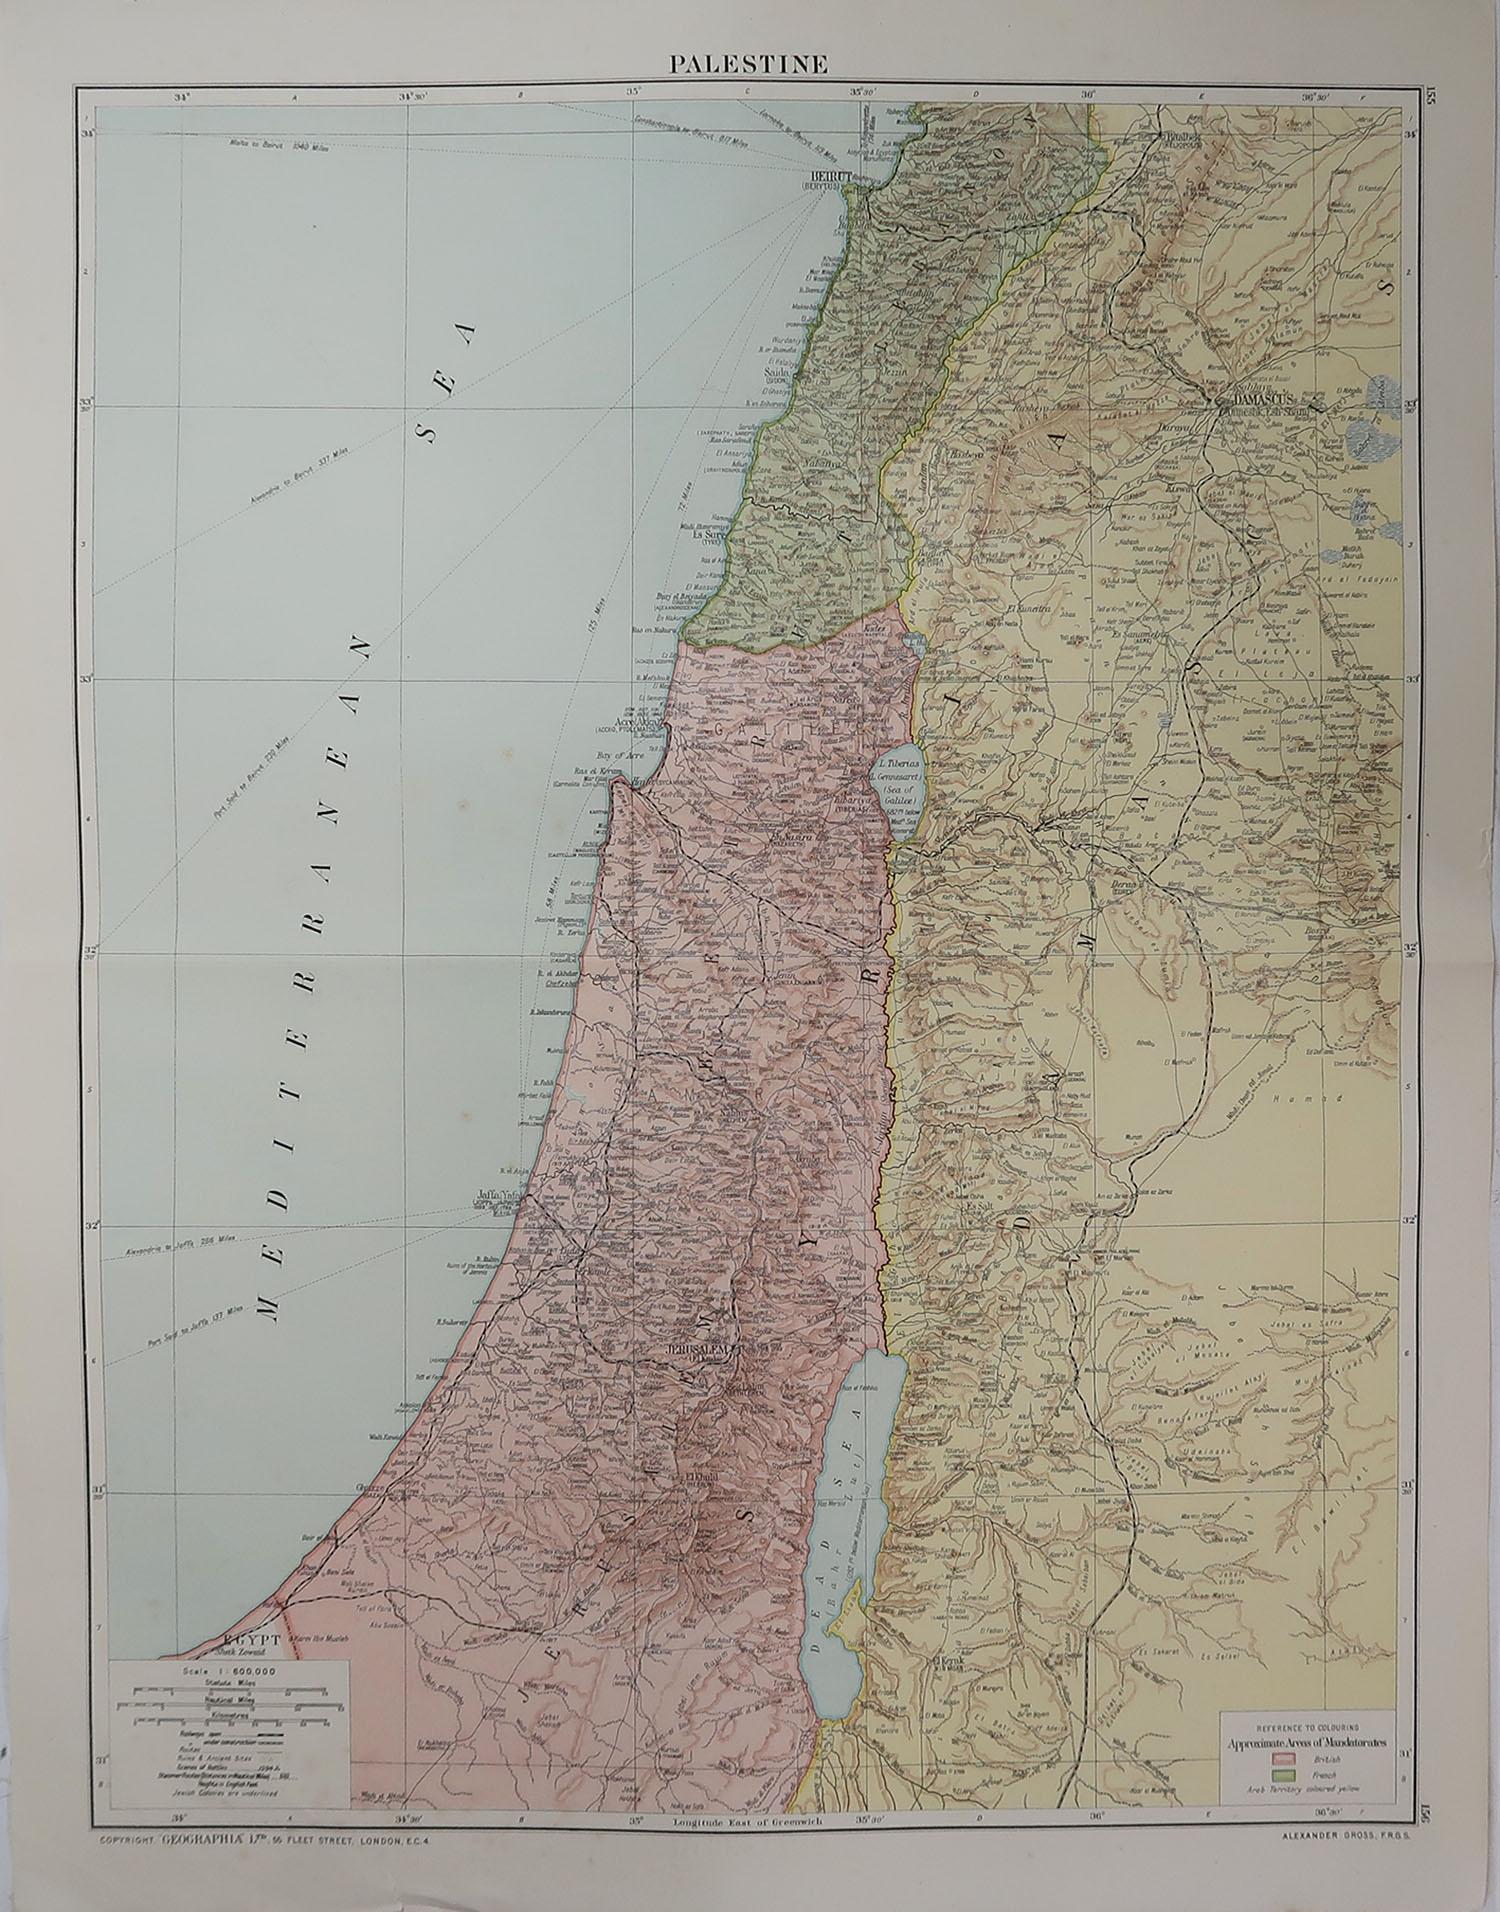 Great map of Israel

Original color. Good condition

Published by Alexander Gross

Unframed.








 